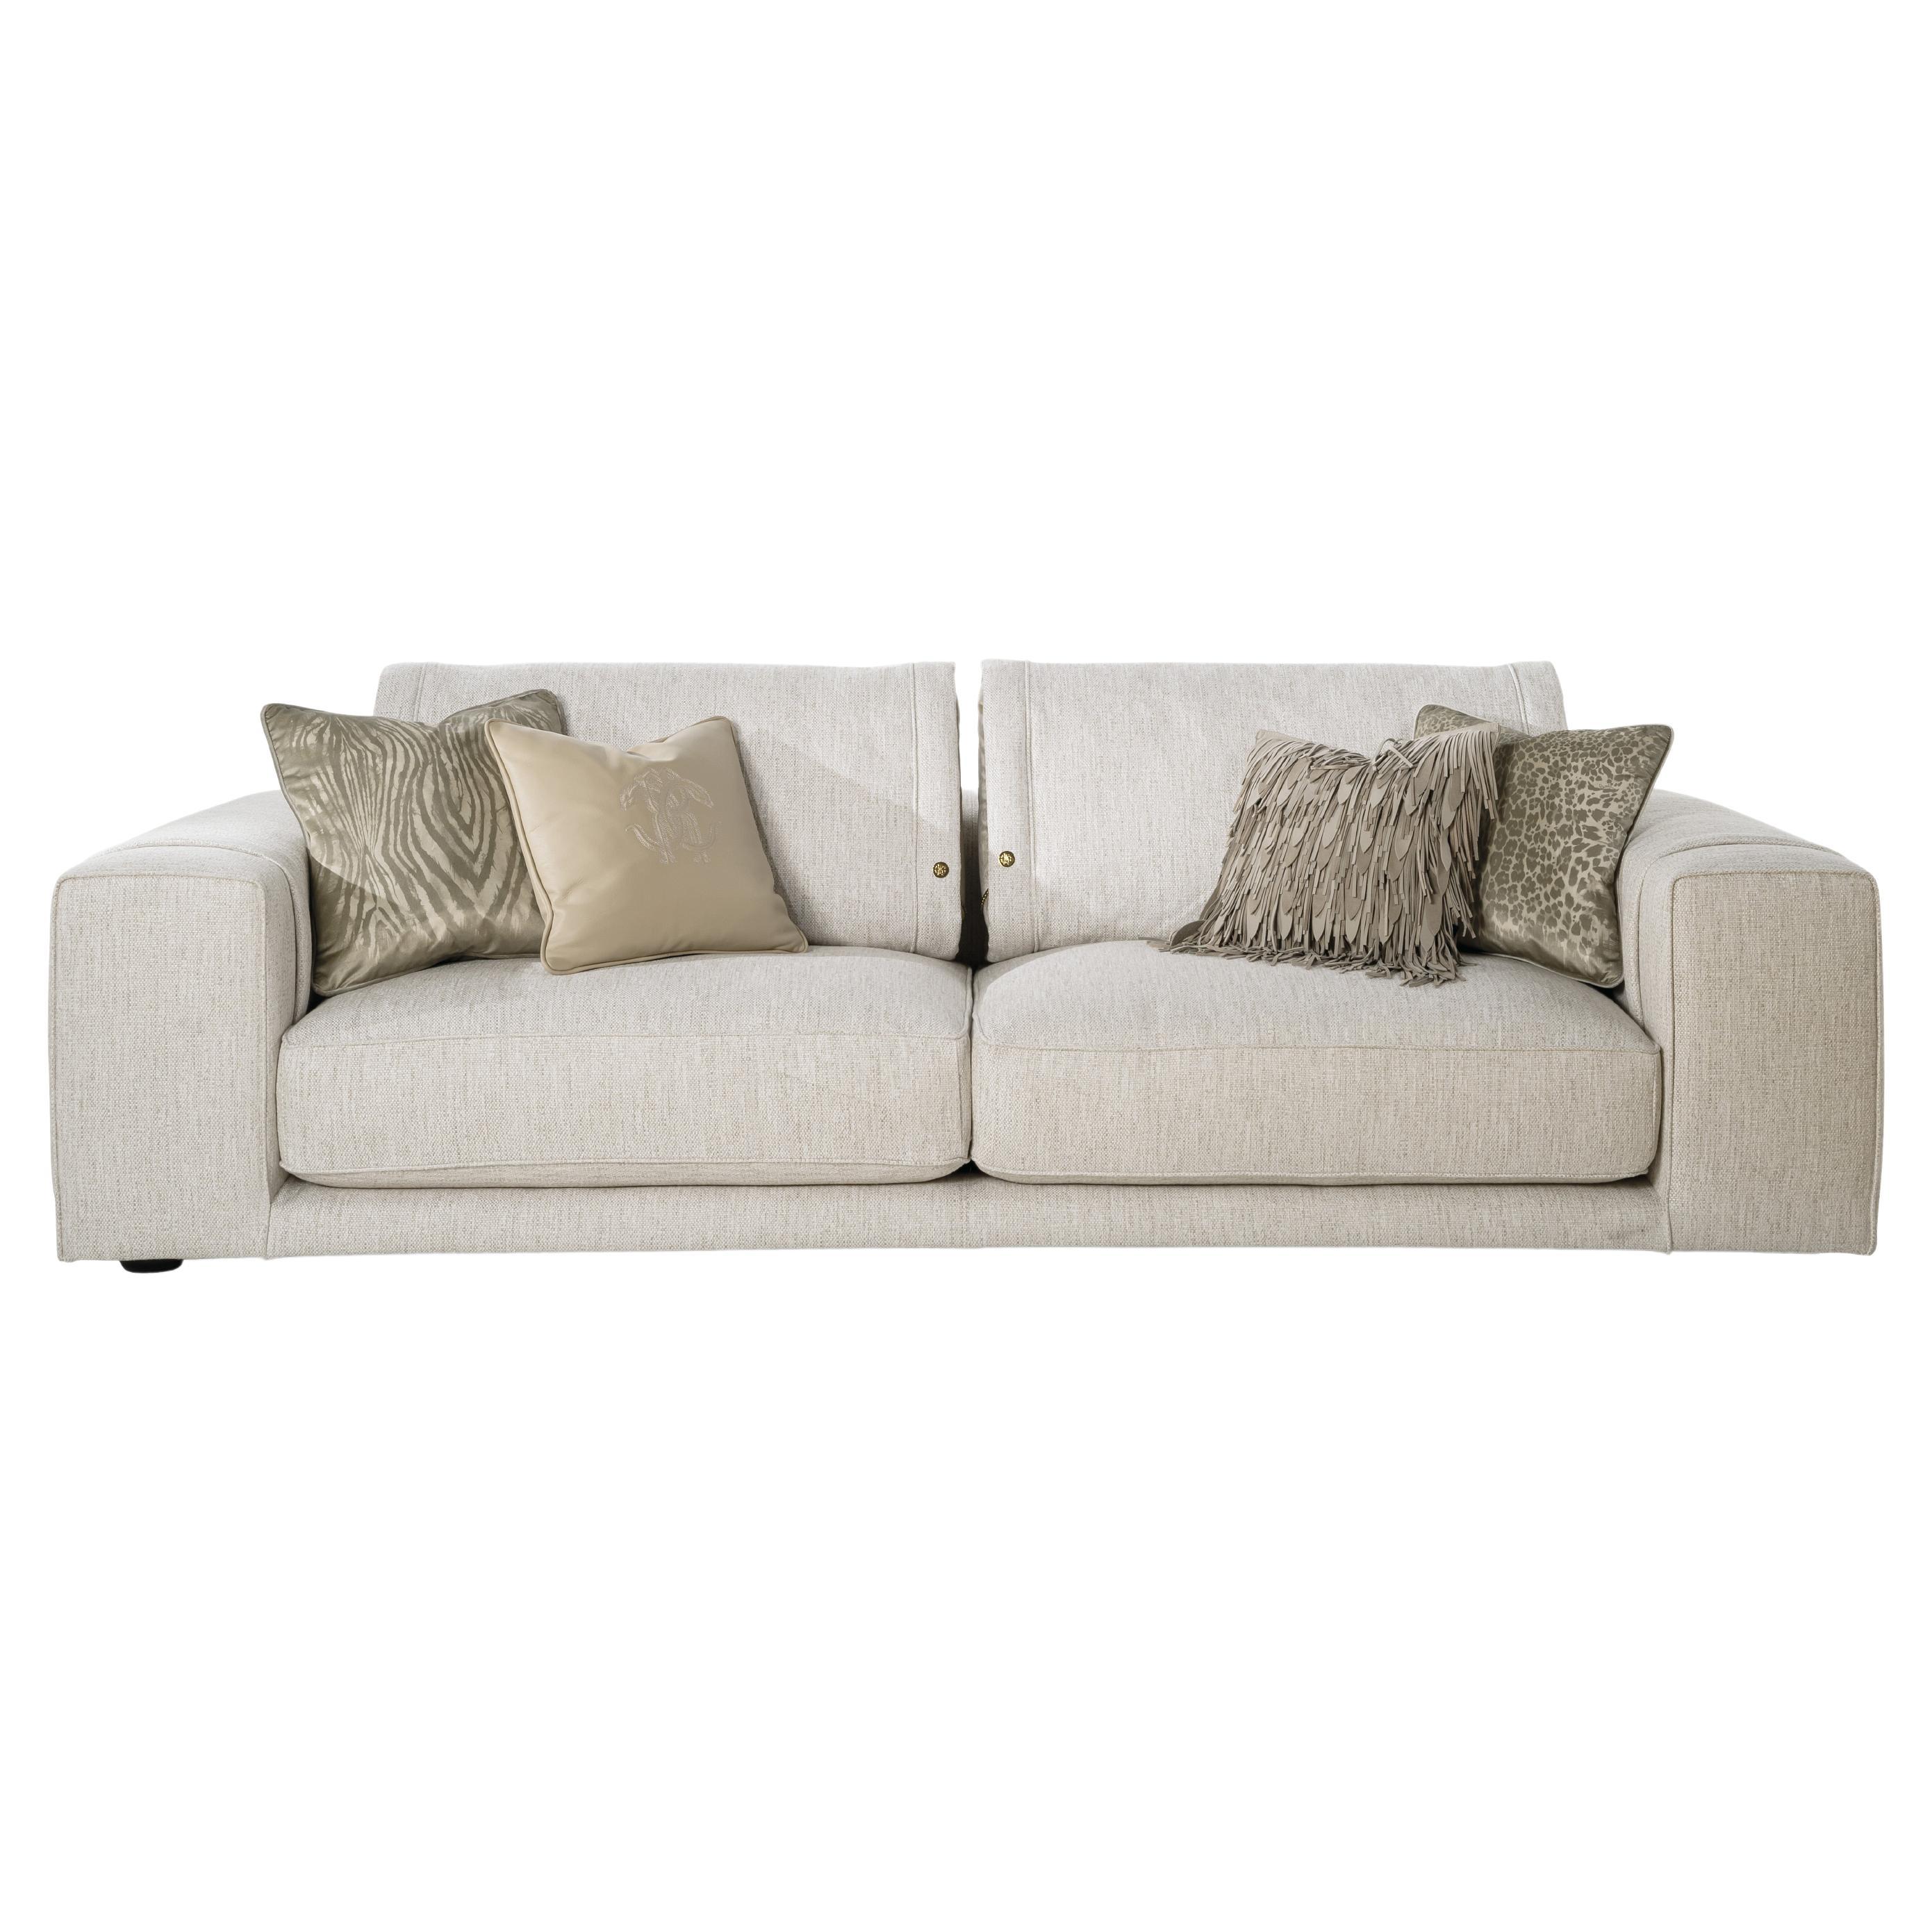 21st Century Smoking 2 Sofa in Fabric by Roberto Cavalli Home Interiors For Sale